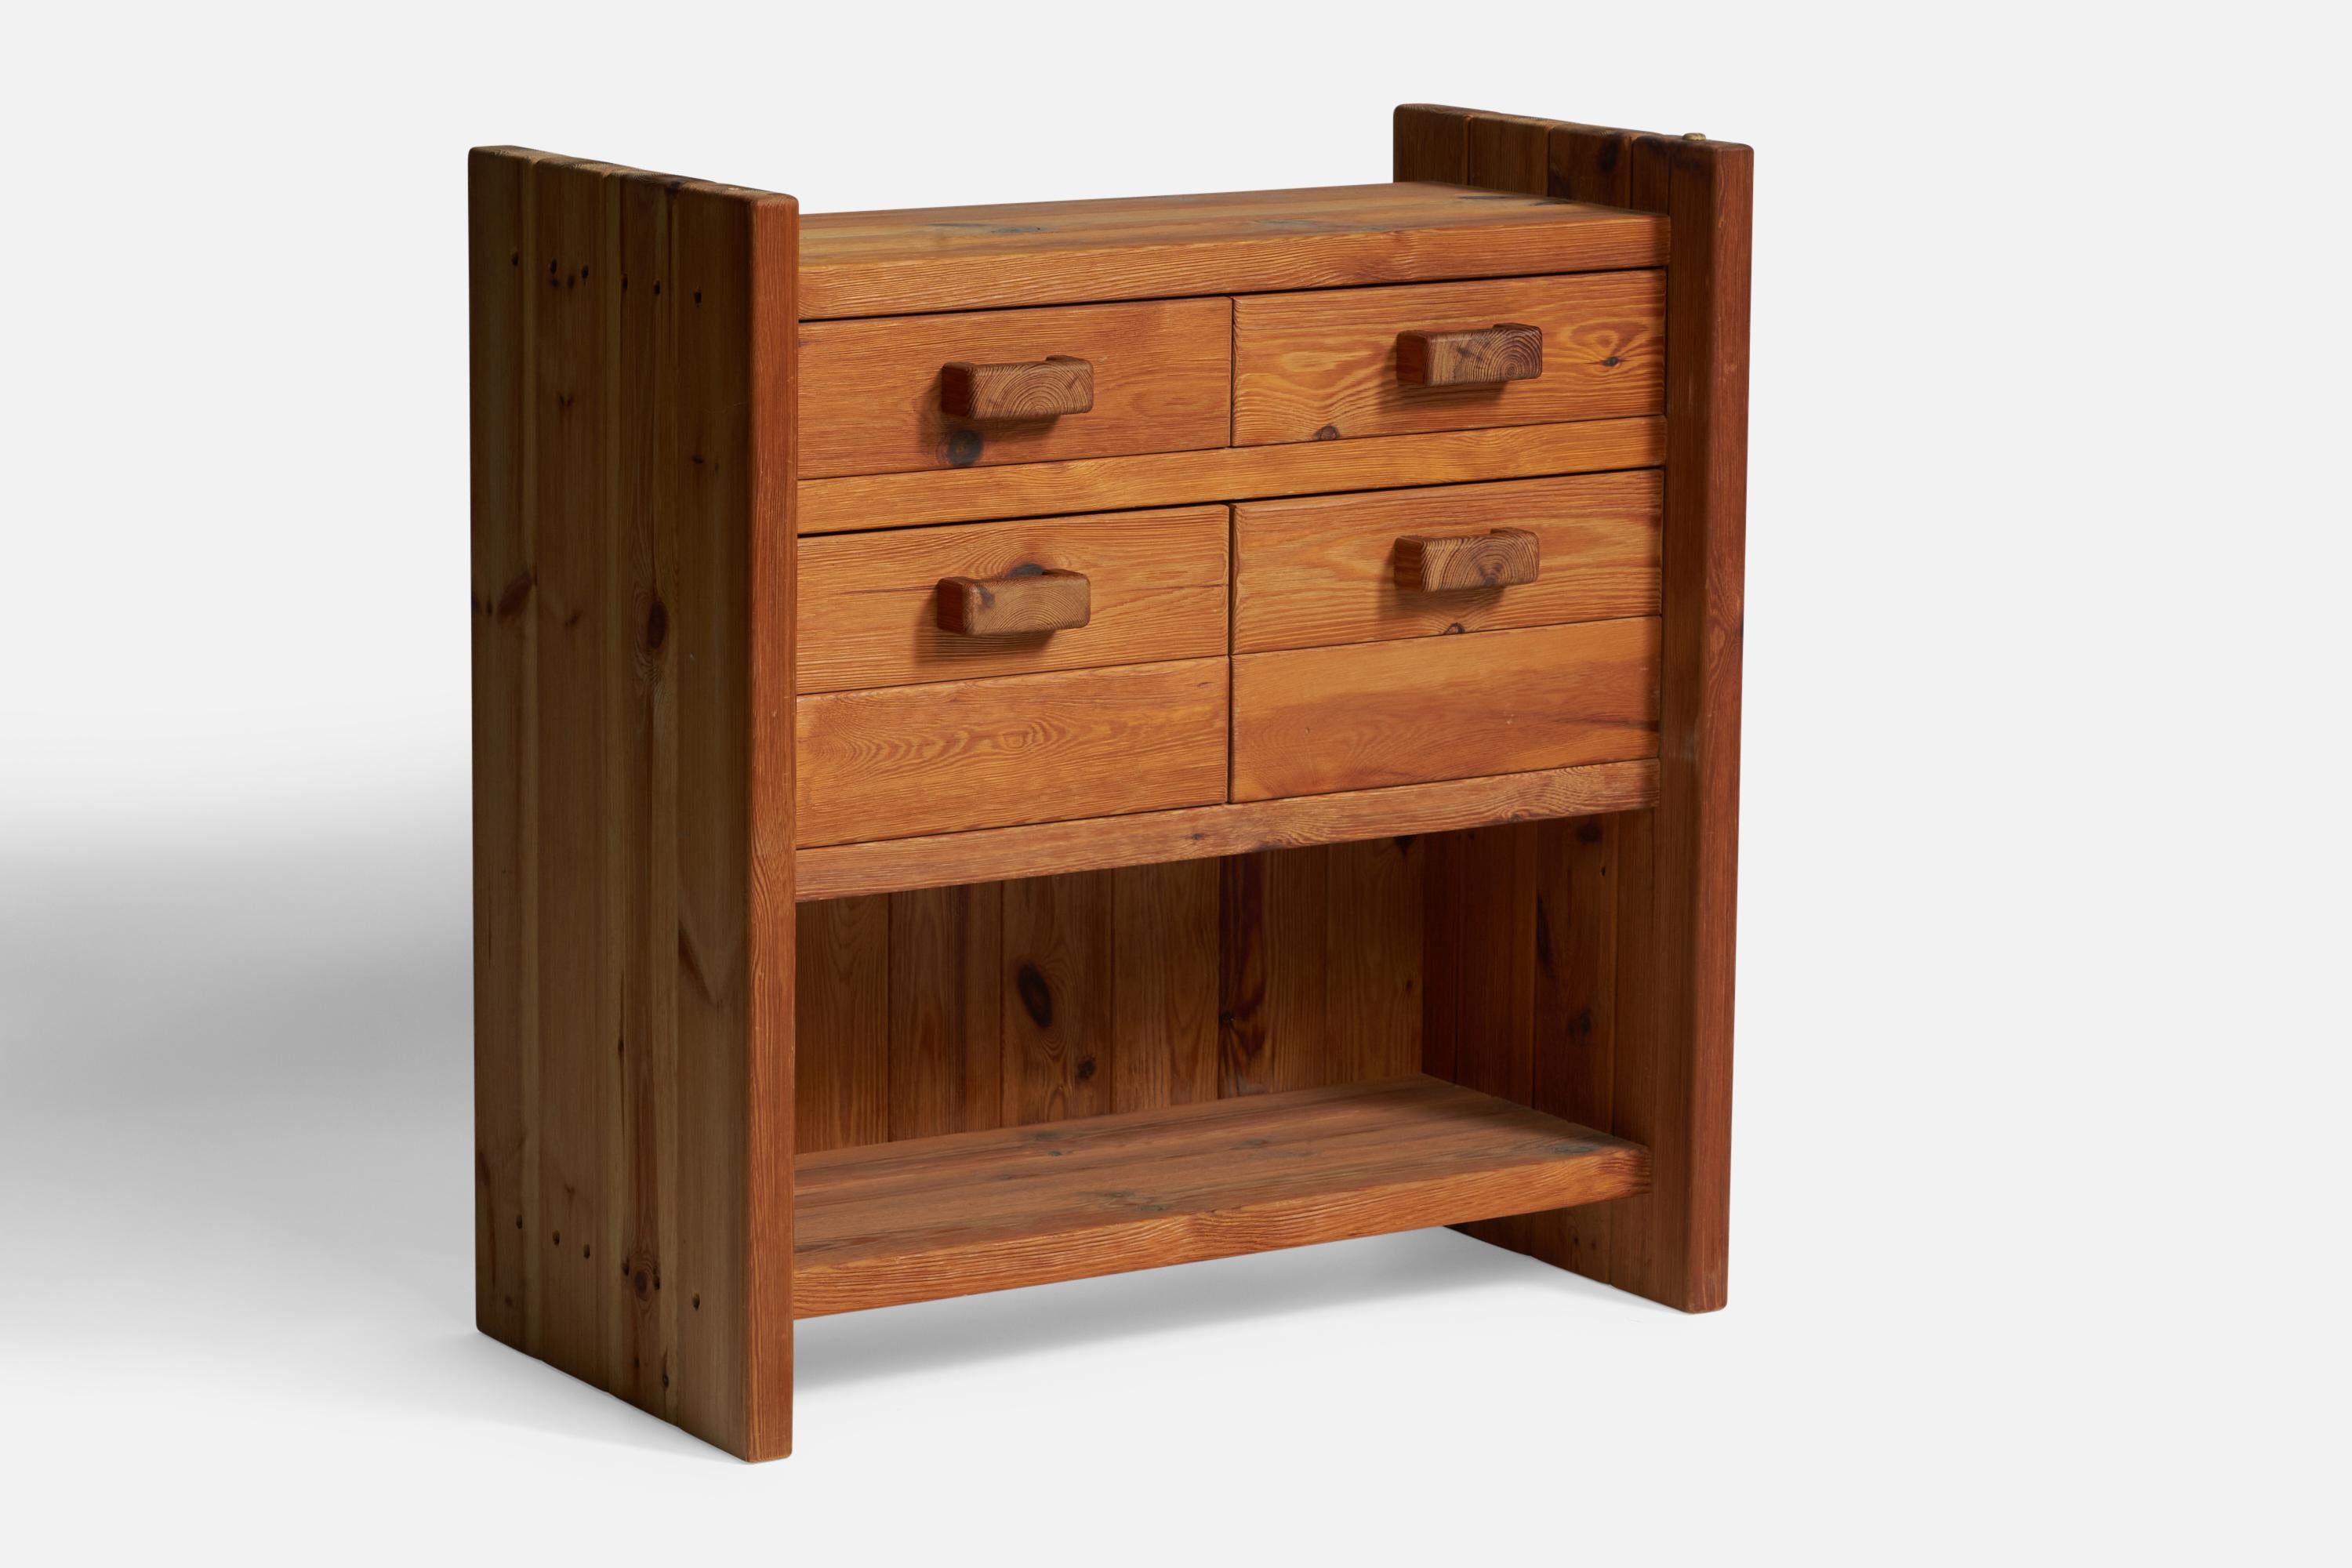 A pine cabinet designed and produced by manufacturer Christian IV, Denmark, 1960s.